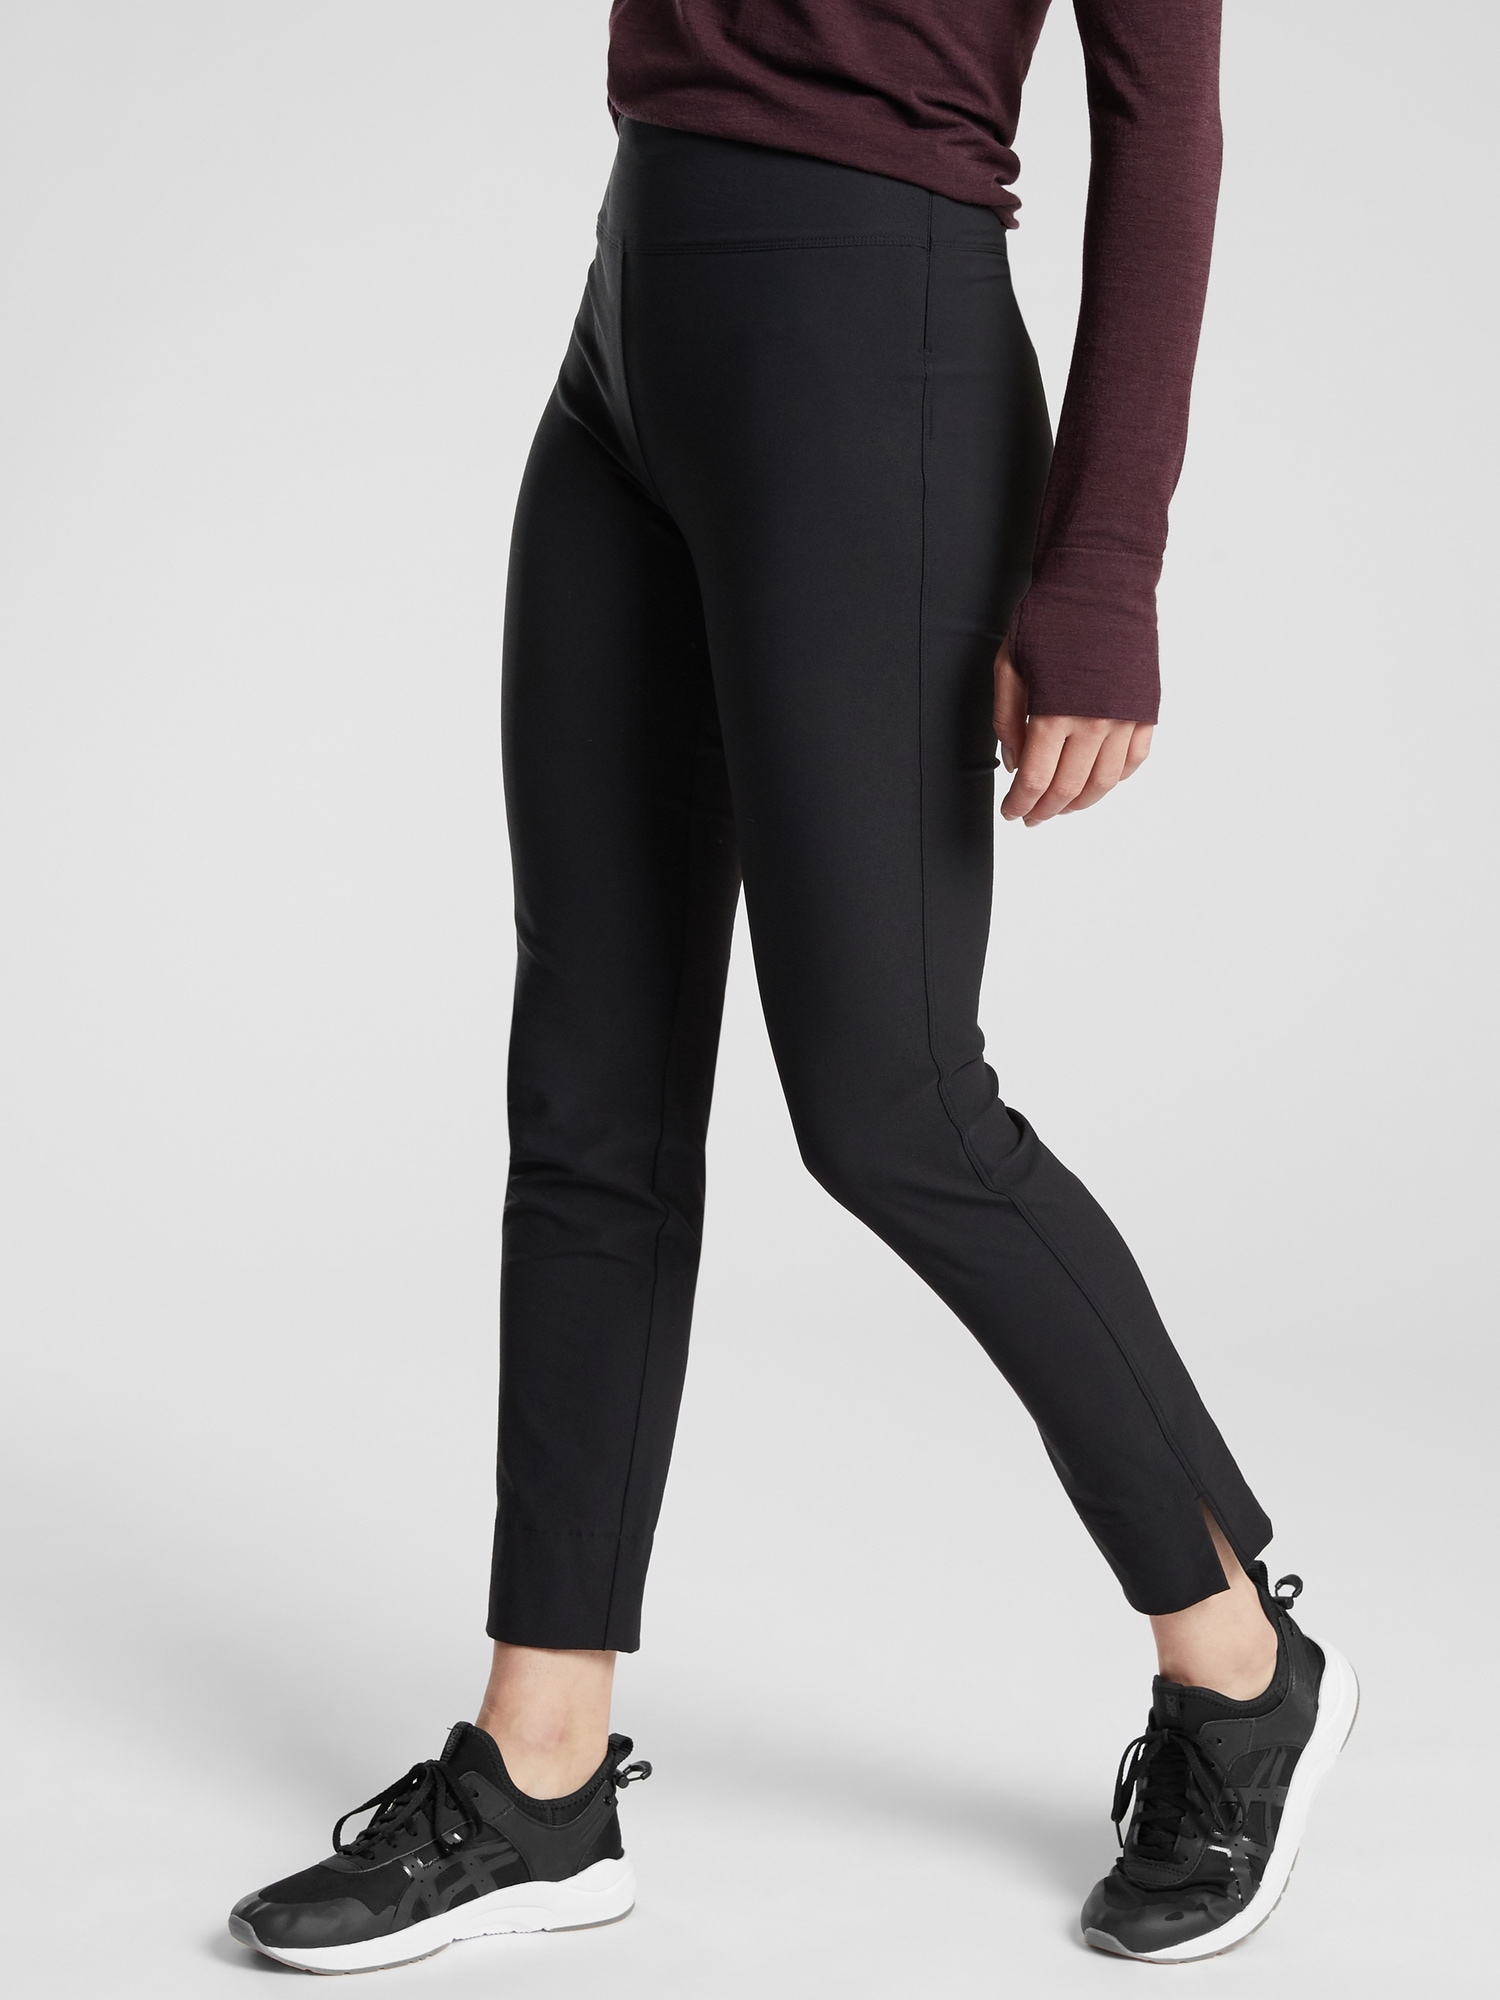 Pattern and Fabric for Athleta Brooklyn Ankle Pants : r/sewing